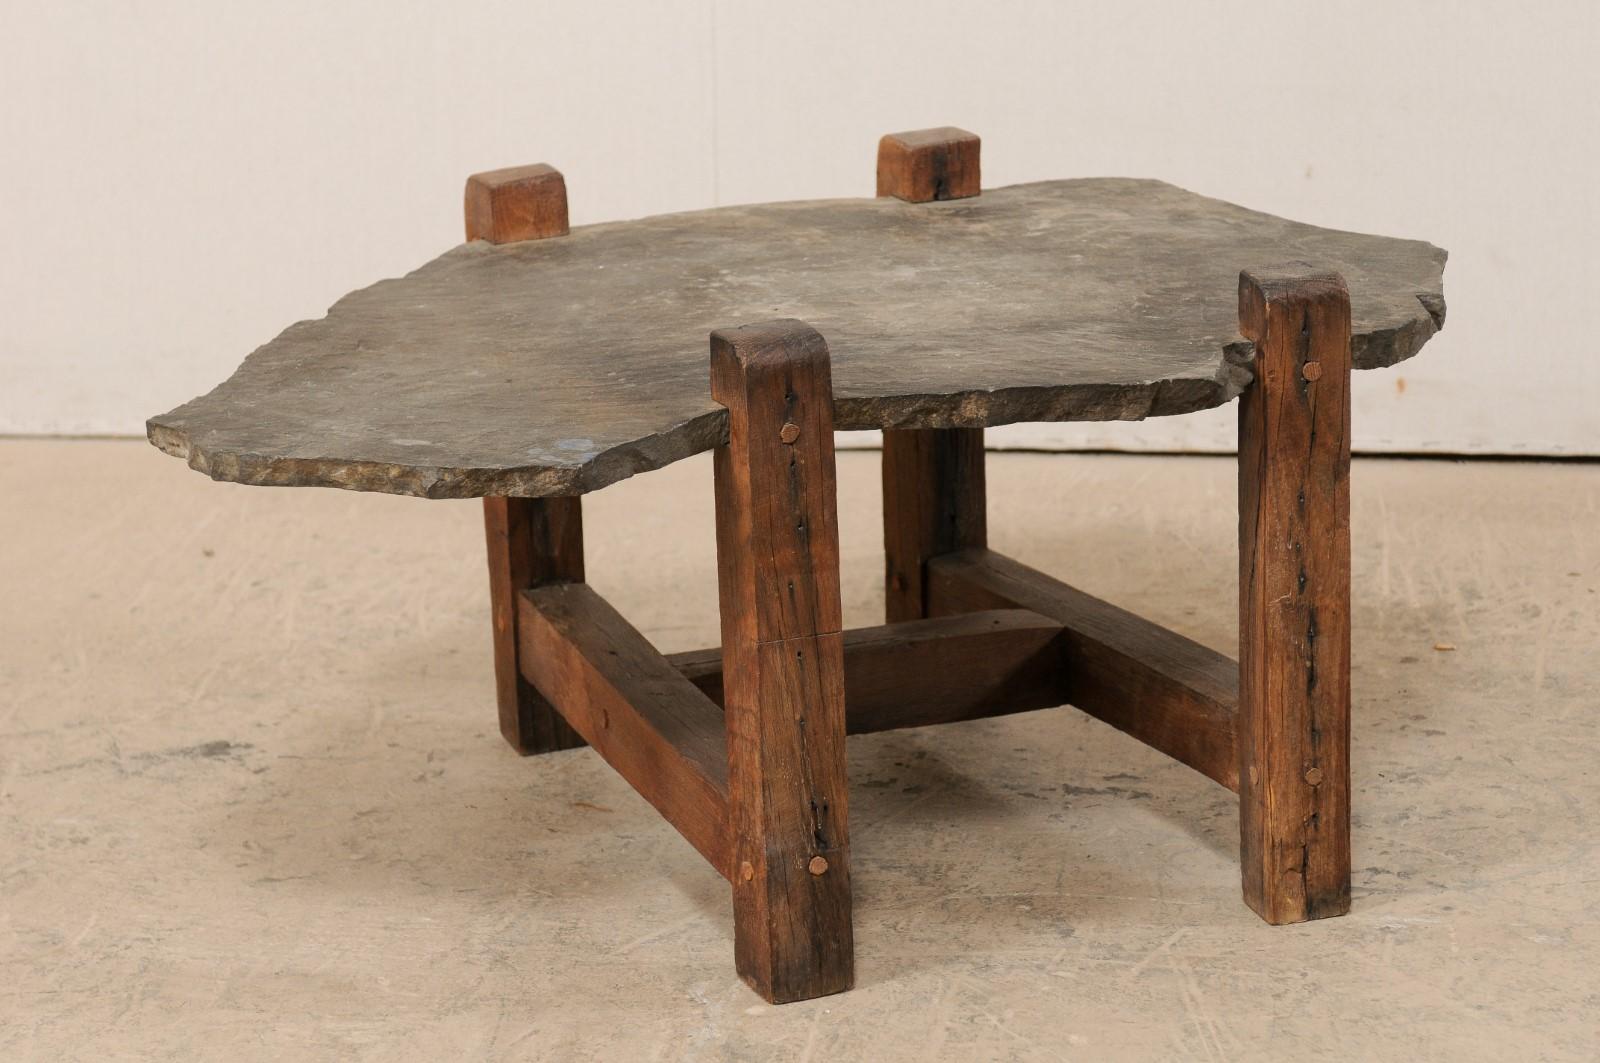 A vintage American wooden coffee table with slate top. This rustic coffee table has been designed with four squared legs, set at each corner, having notched cut-outs just below their tops, where a slab of natural slate stone makes up the table top.